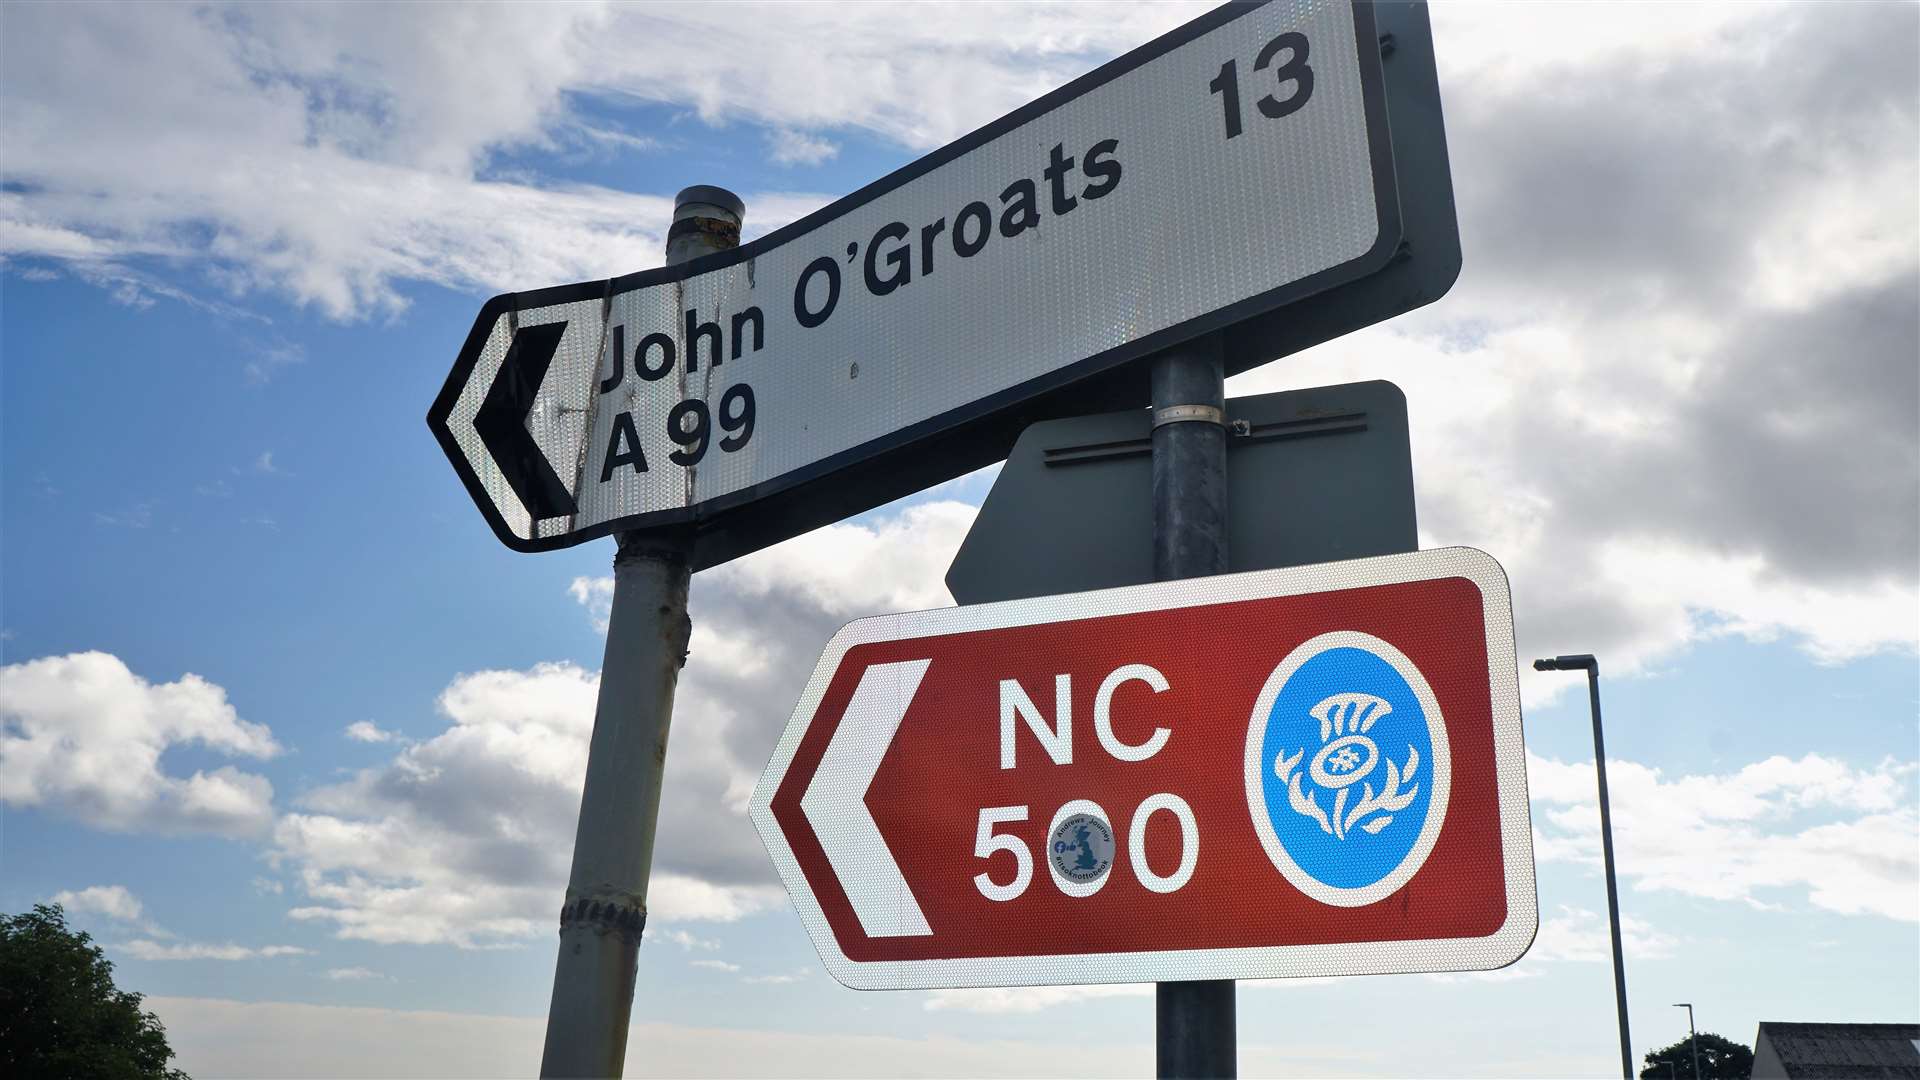 The NC500 route markers at the junction are small and partly obscured by stickers. Picture: DGS